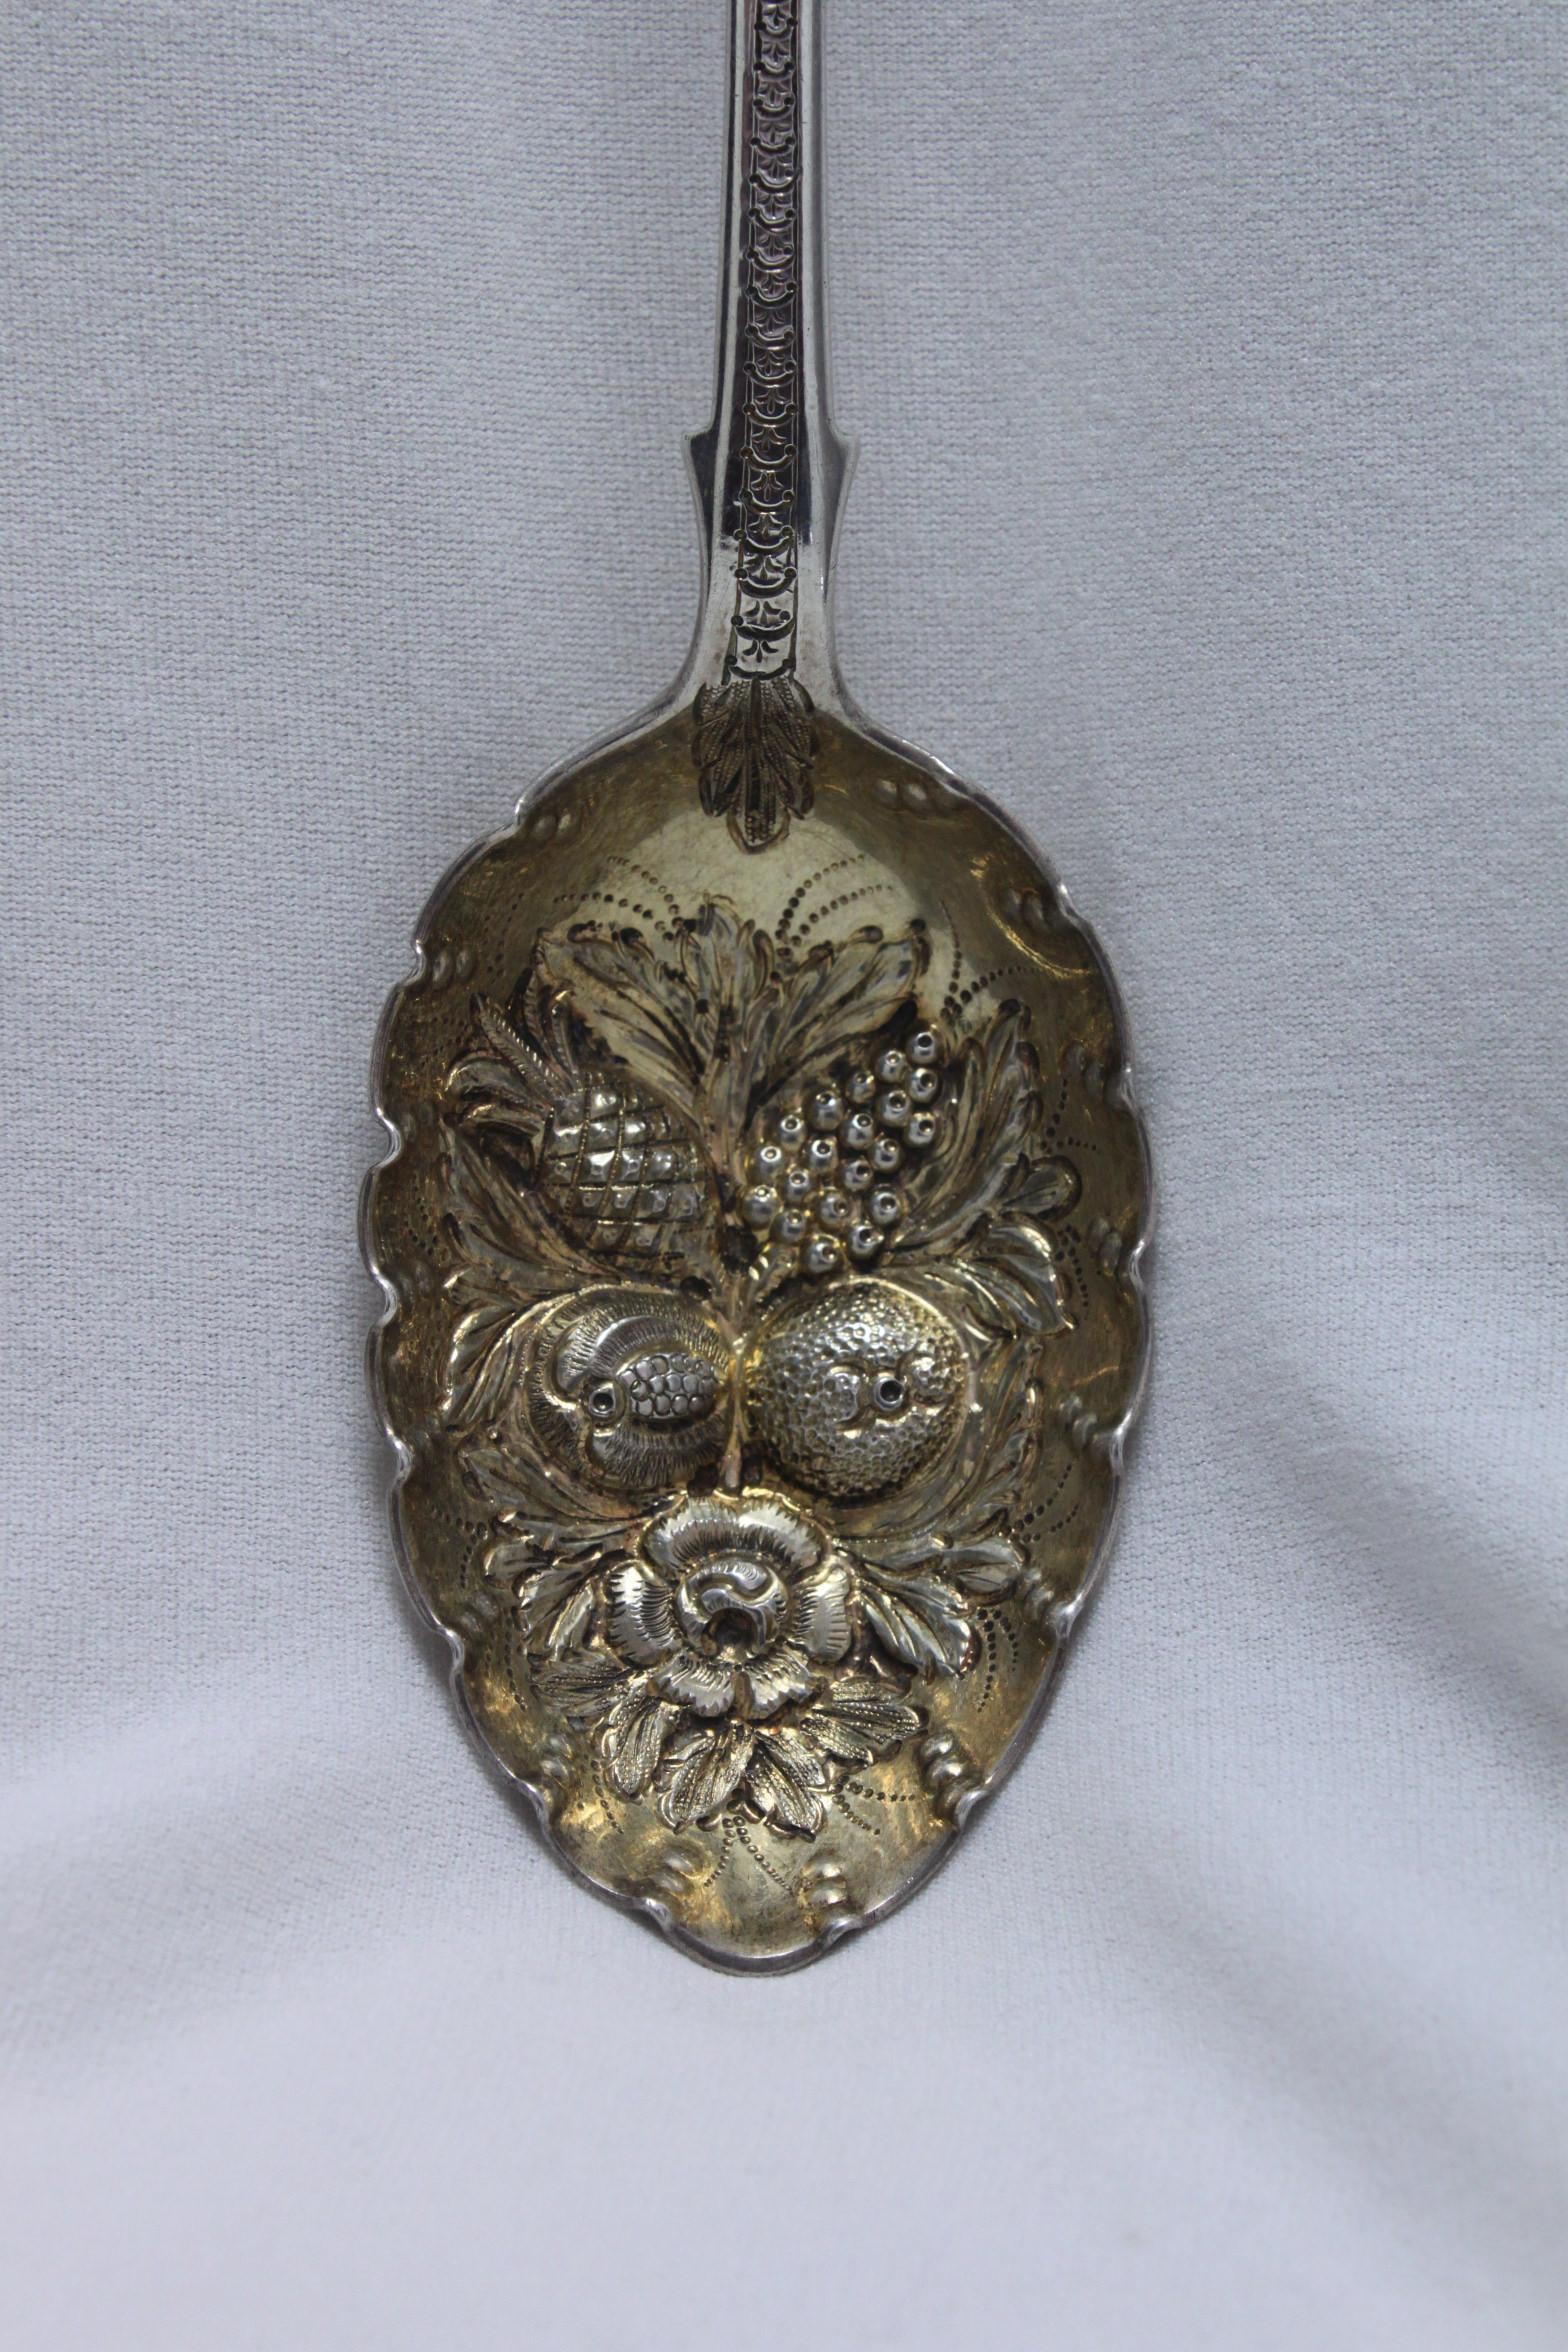 This lovely sterling silver berry spoon was made by James and Josiah Williams of Exeter and it carries the hallmarkmark for 1861. The ornate decoration leads from the fiddle pattern top of the handle down to the embossed bowl which features, amongst